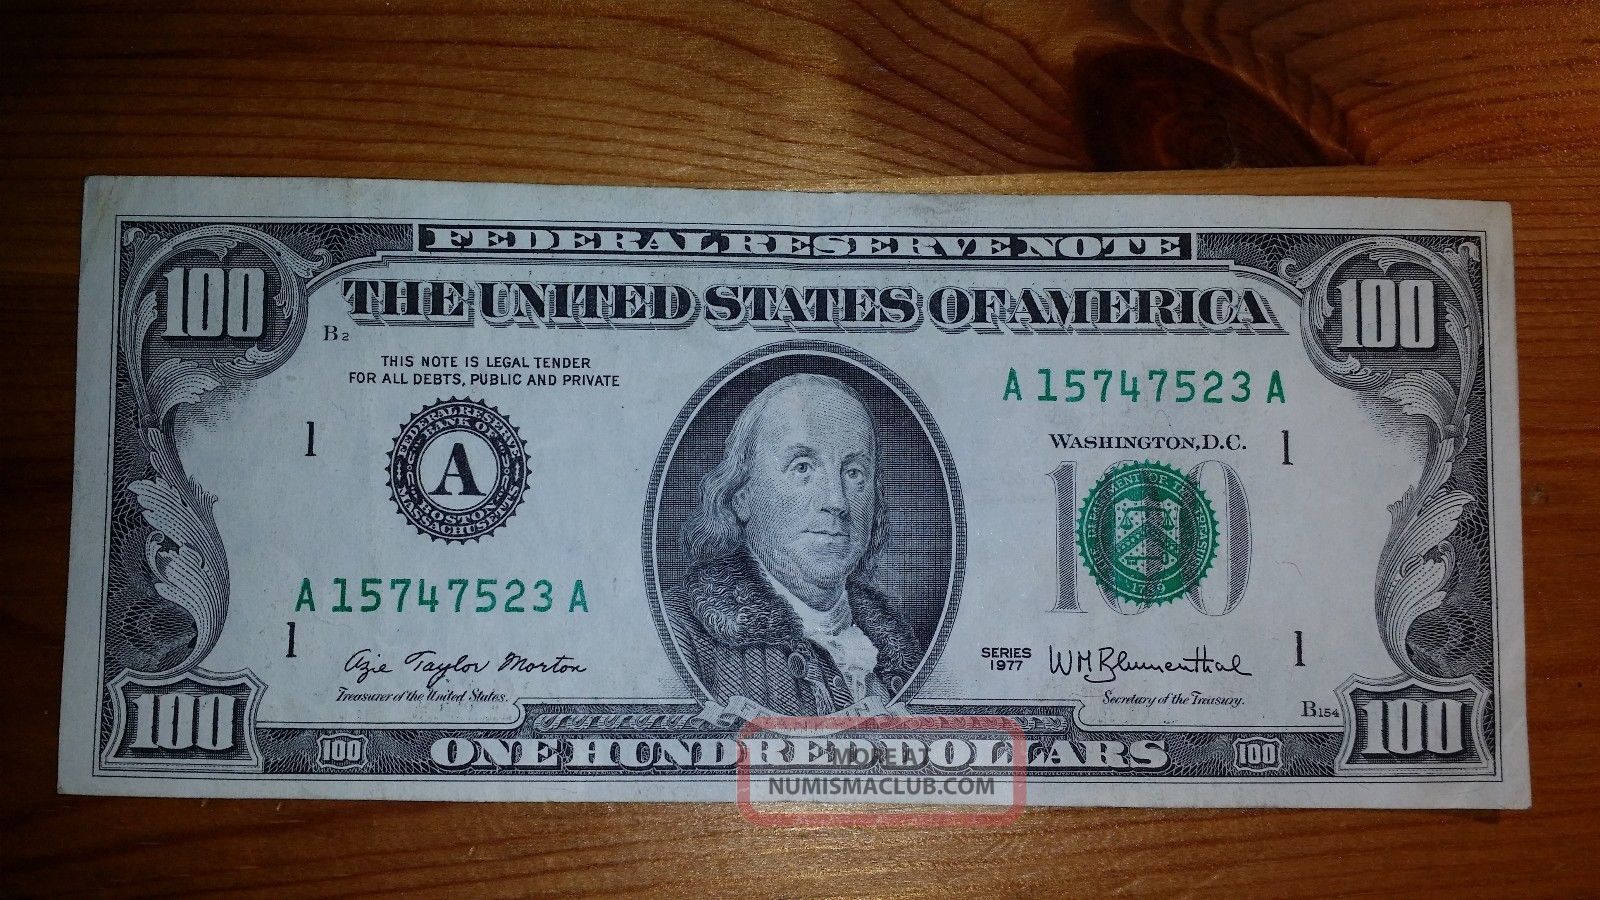 1977-100-one-hundred-dollar-bill-federal-reserve-note-a15747523a